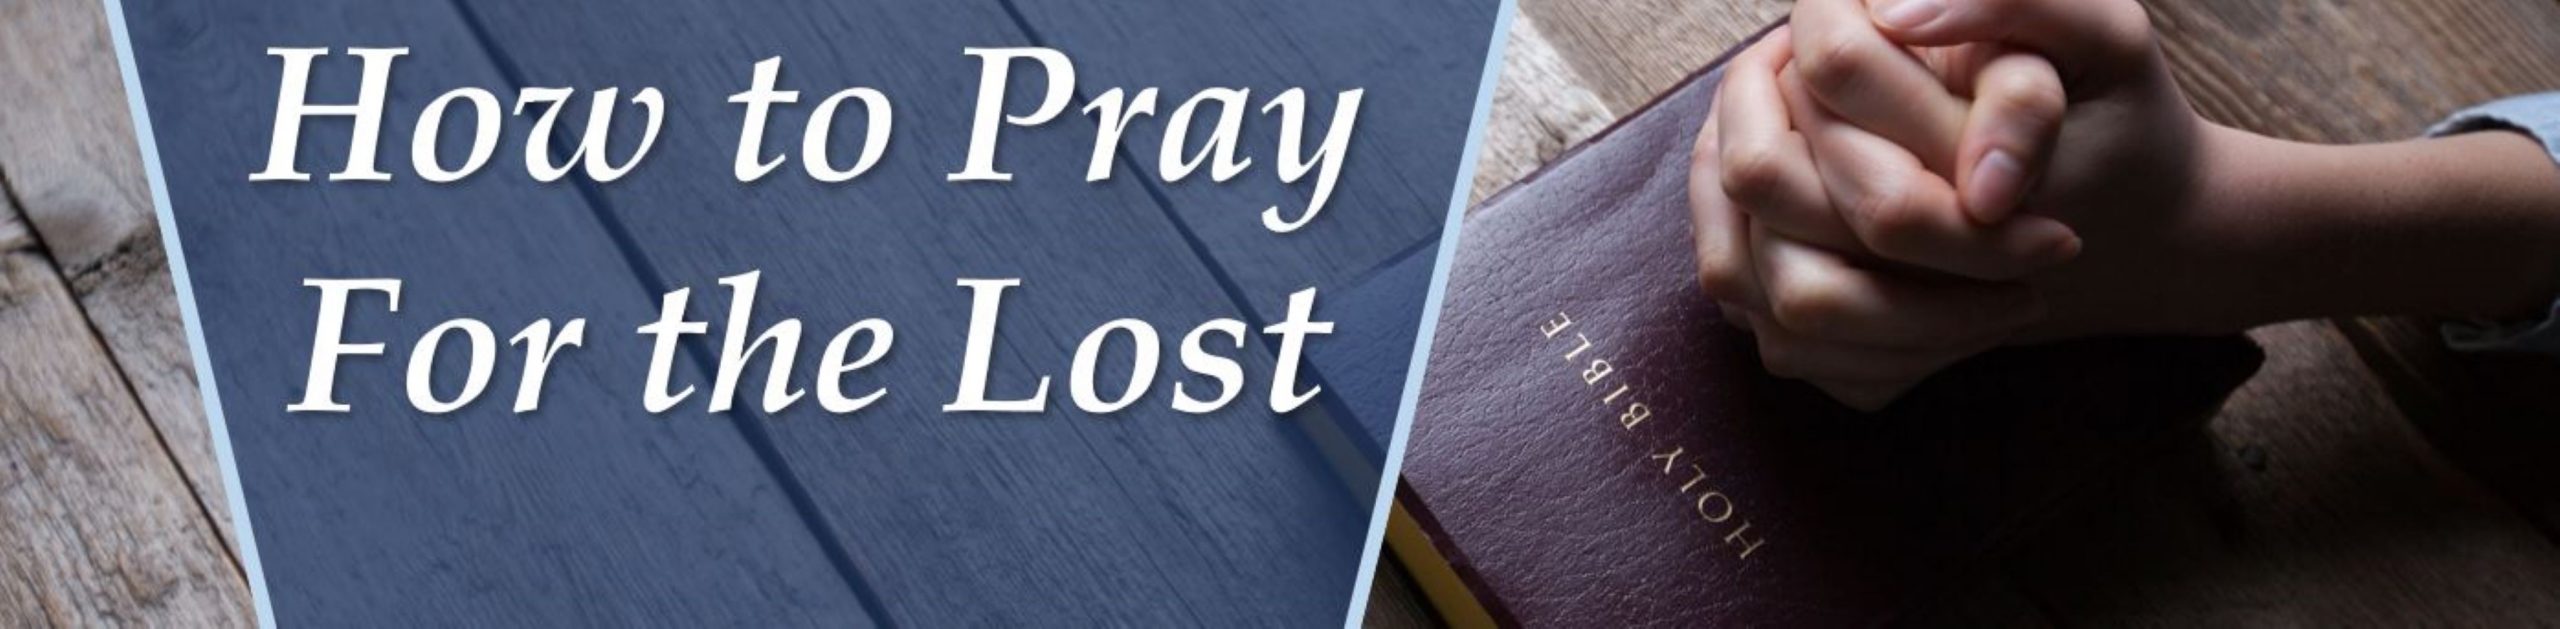 How to Pray For the Lost - Victory Baptist Church